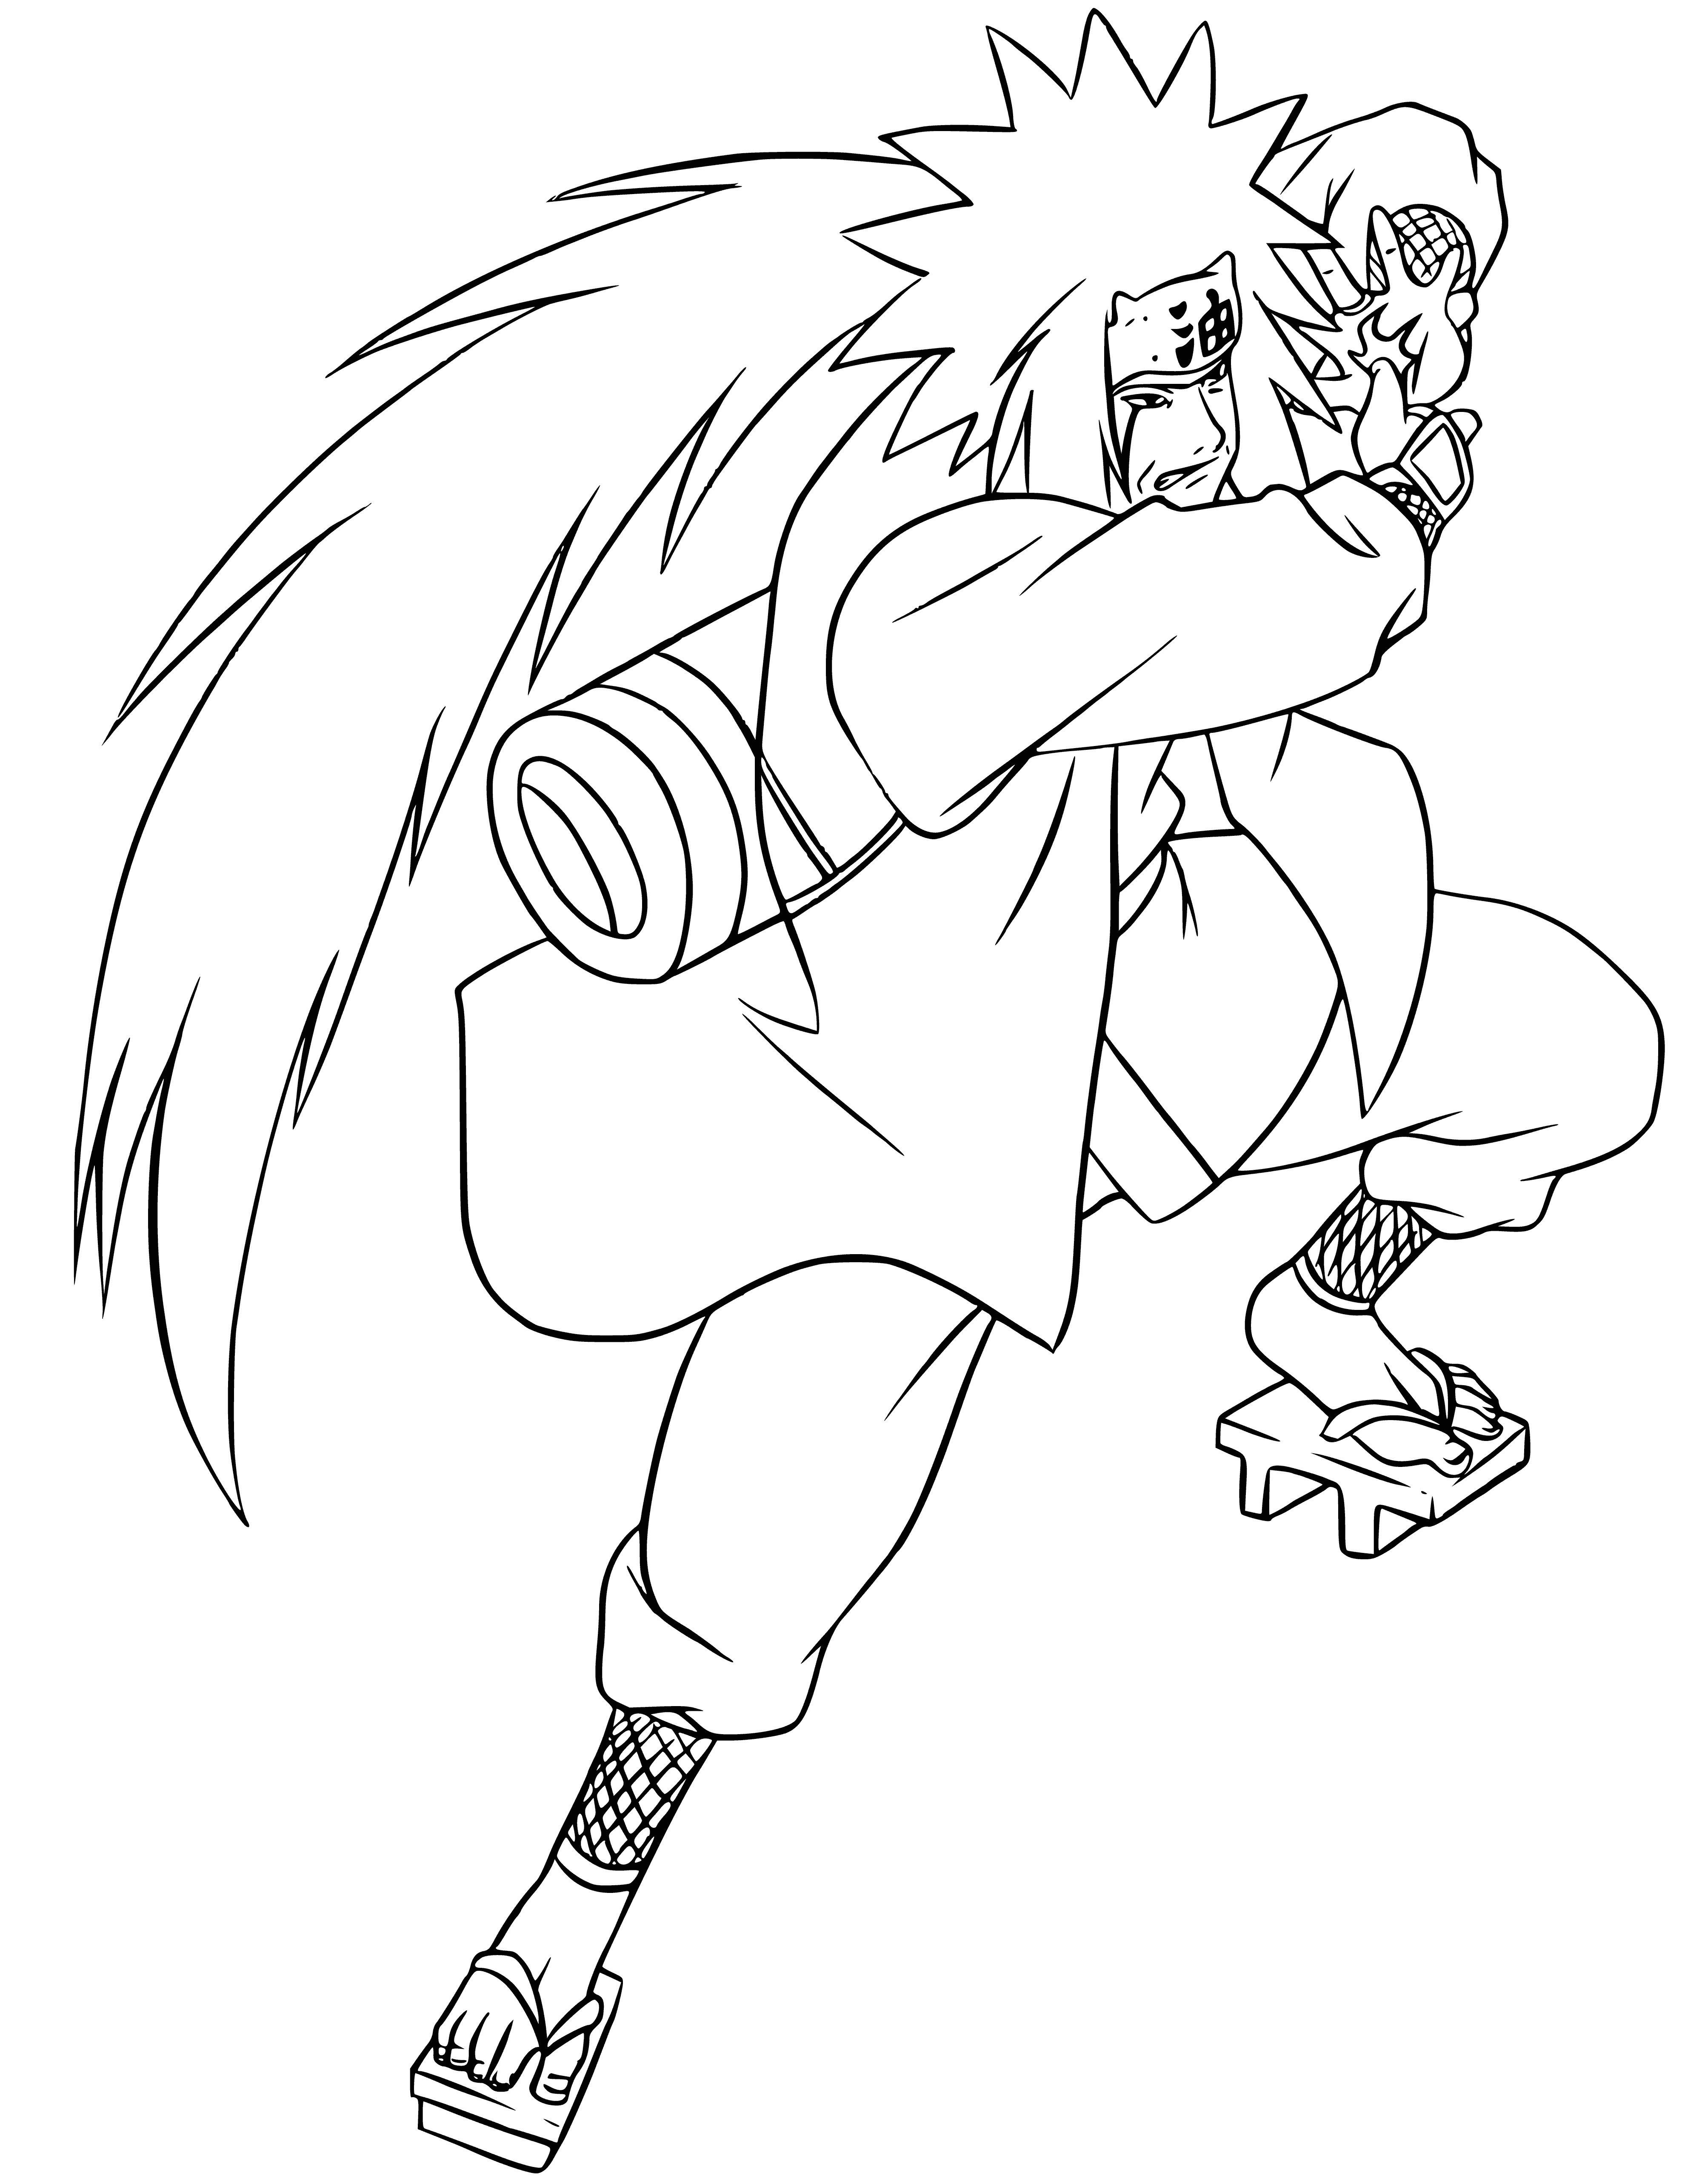 coloring page: Man in red robe w/ white lining & black belt holds scroll & sword in front of mountain.